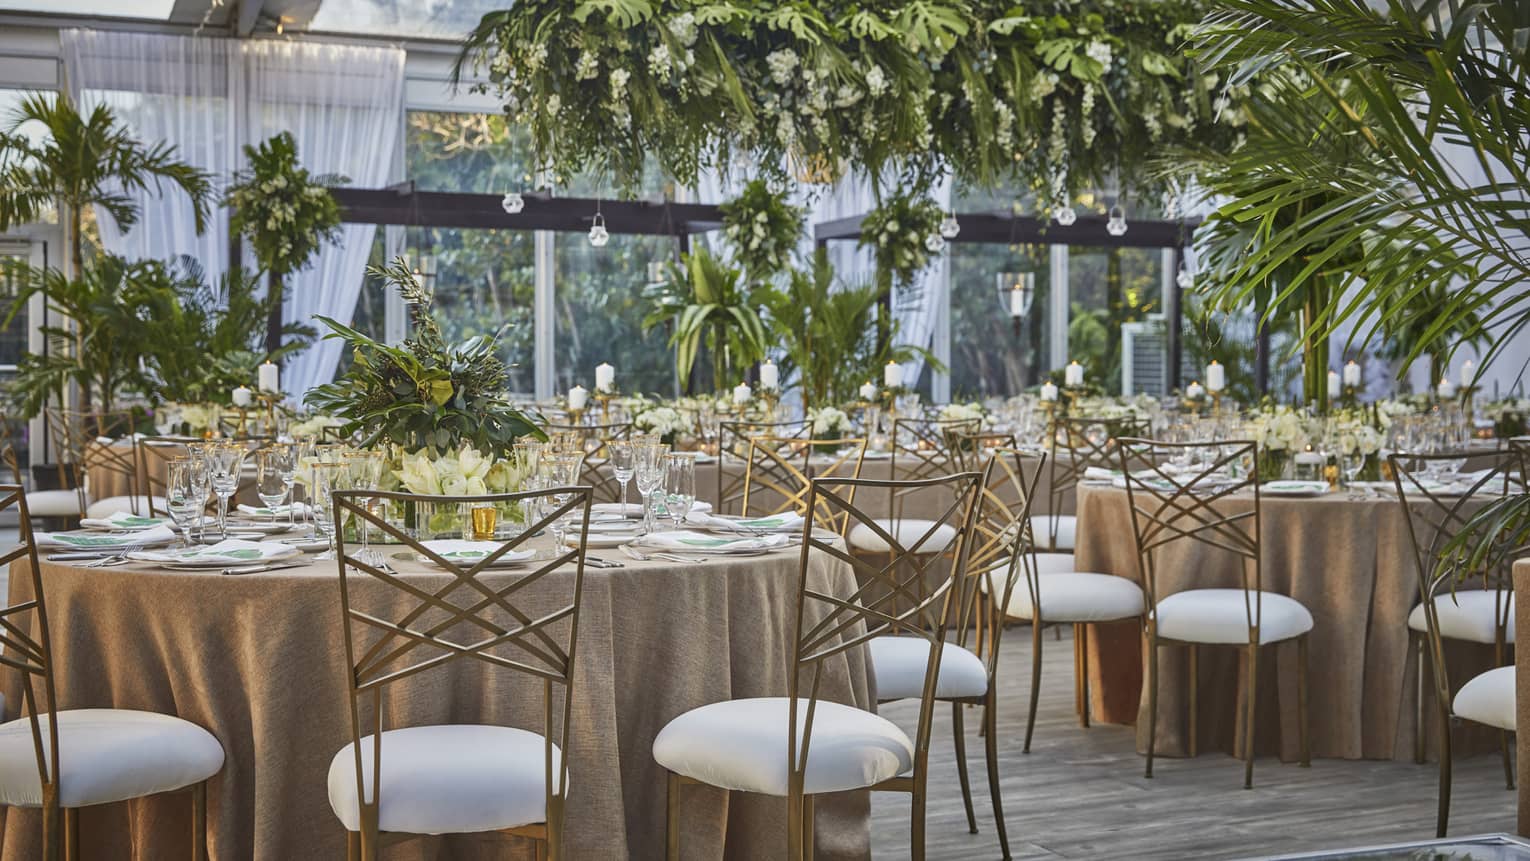 Wedding banquet, round dining tables with tropical greenery